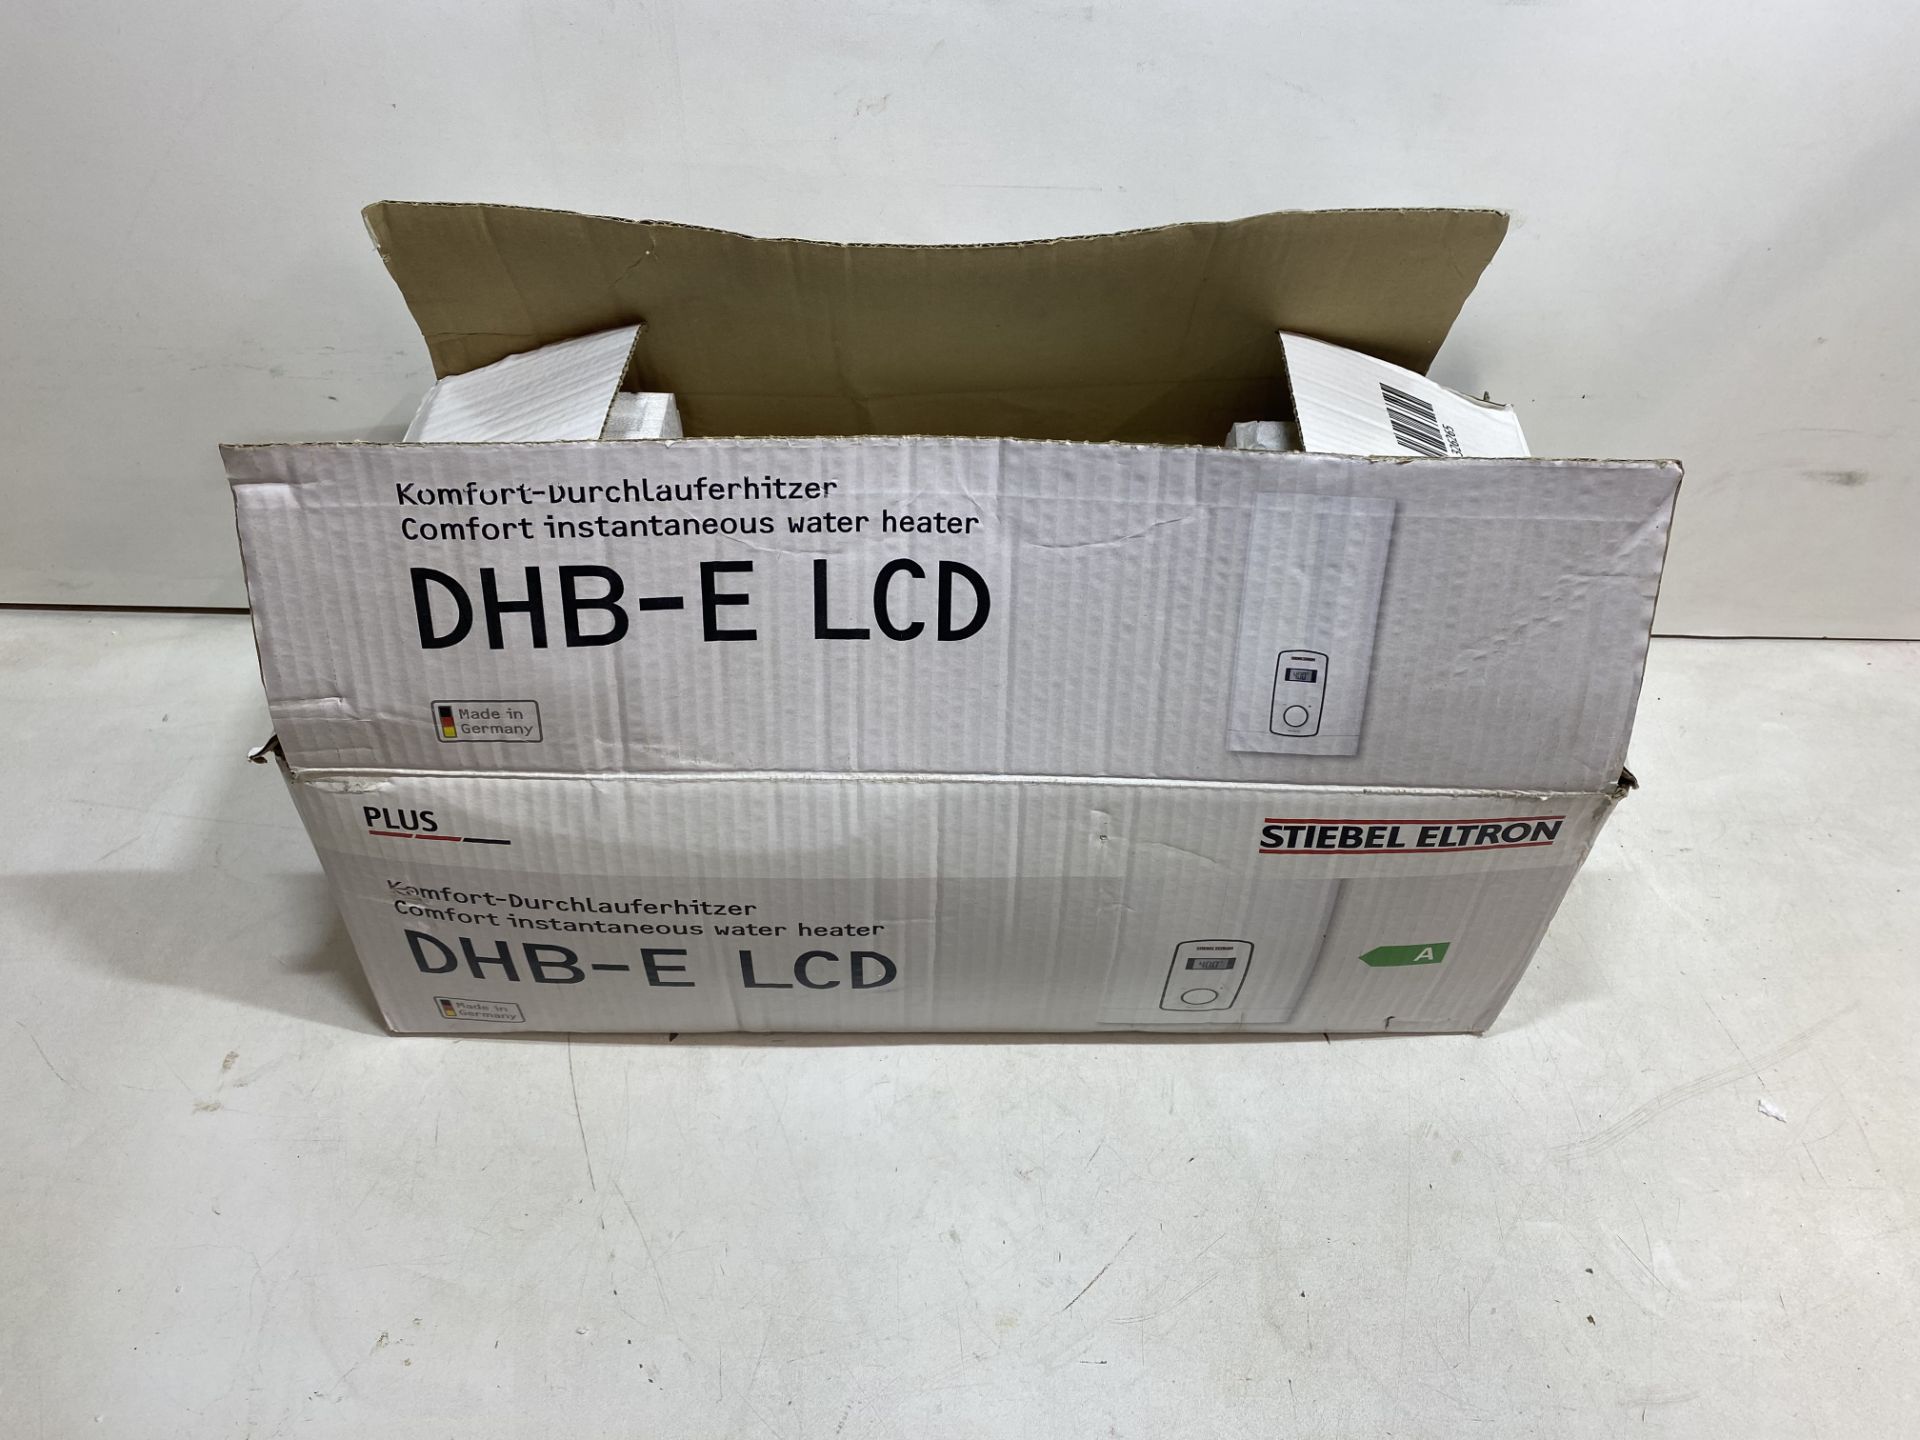 Stiebel Eltron DHB-E 18/21/24 LCD Comfort Instantaneous Water Heater - Image 7 of 7